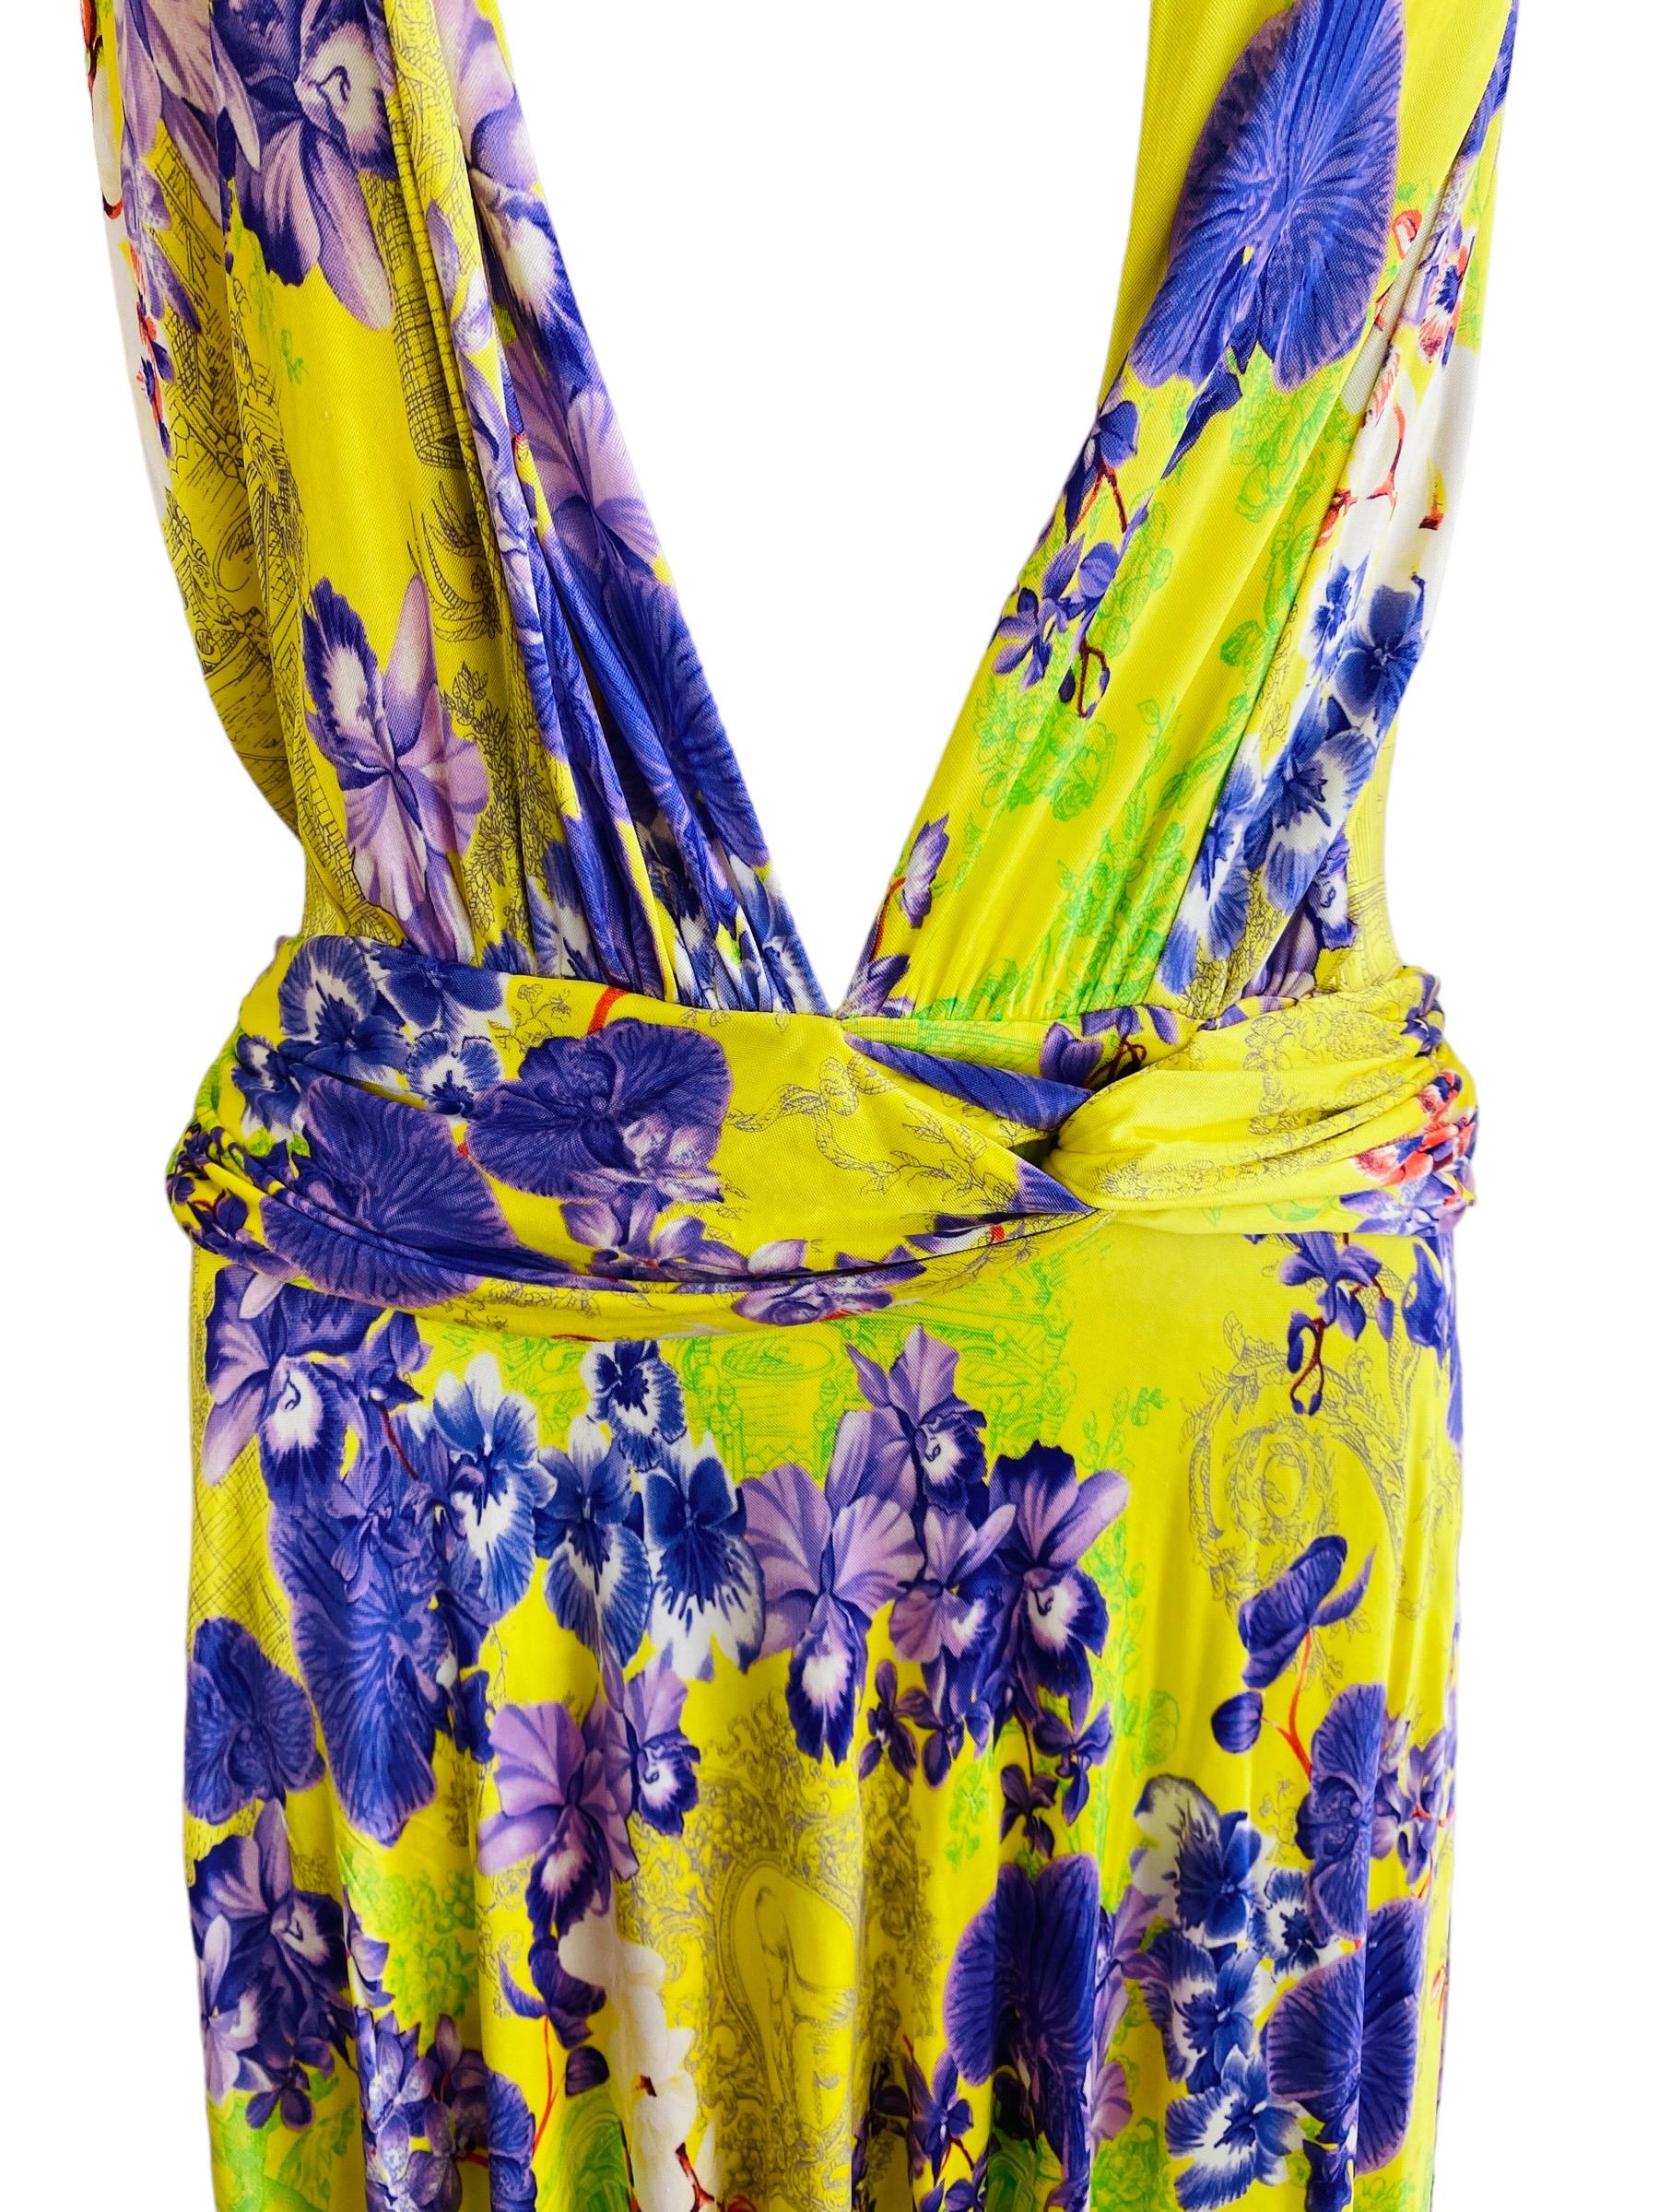 Vintage S/S 2004 Versace Dress Bright Yellow + Purple Orchid Floral Runway For Sale 2